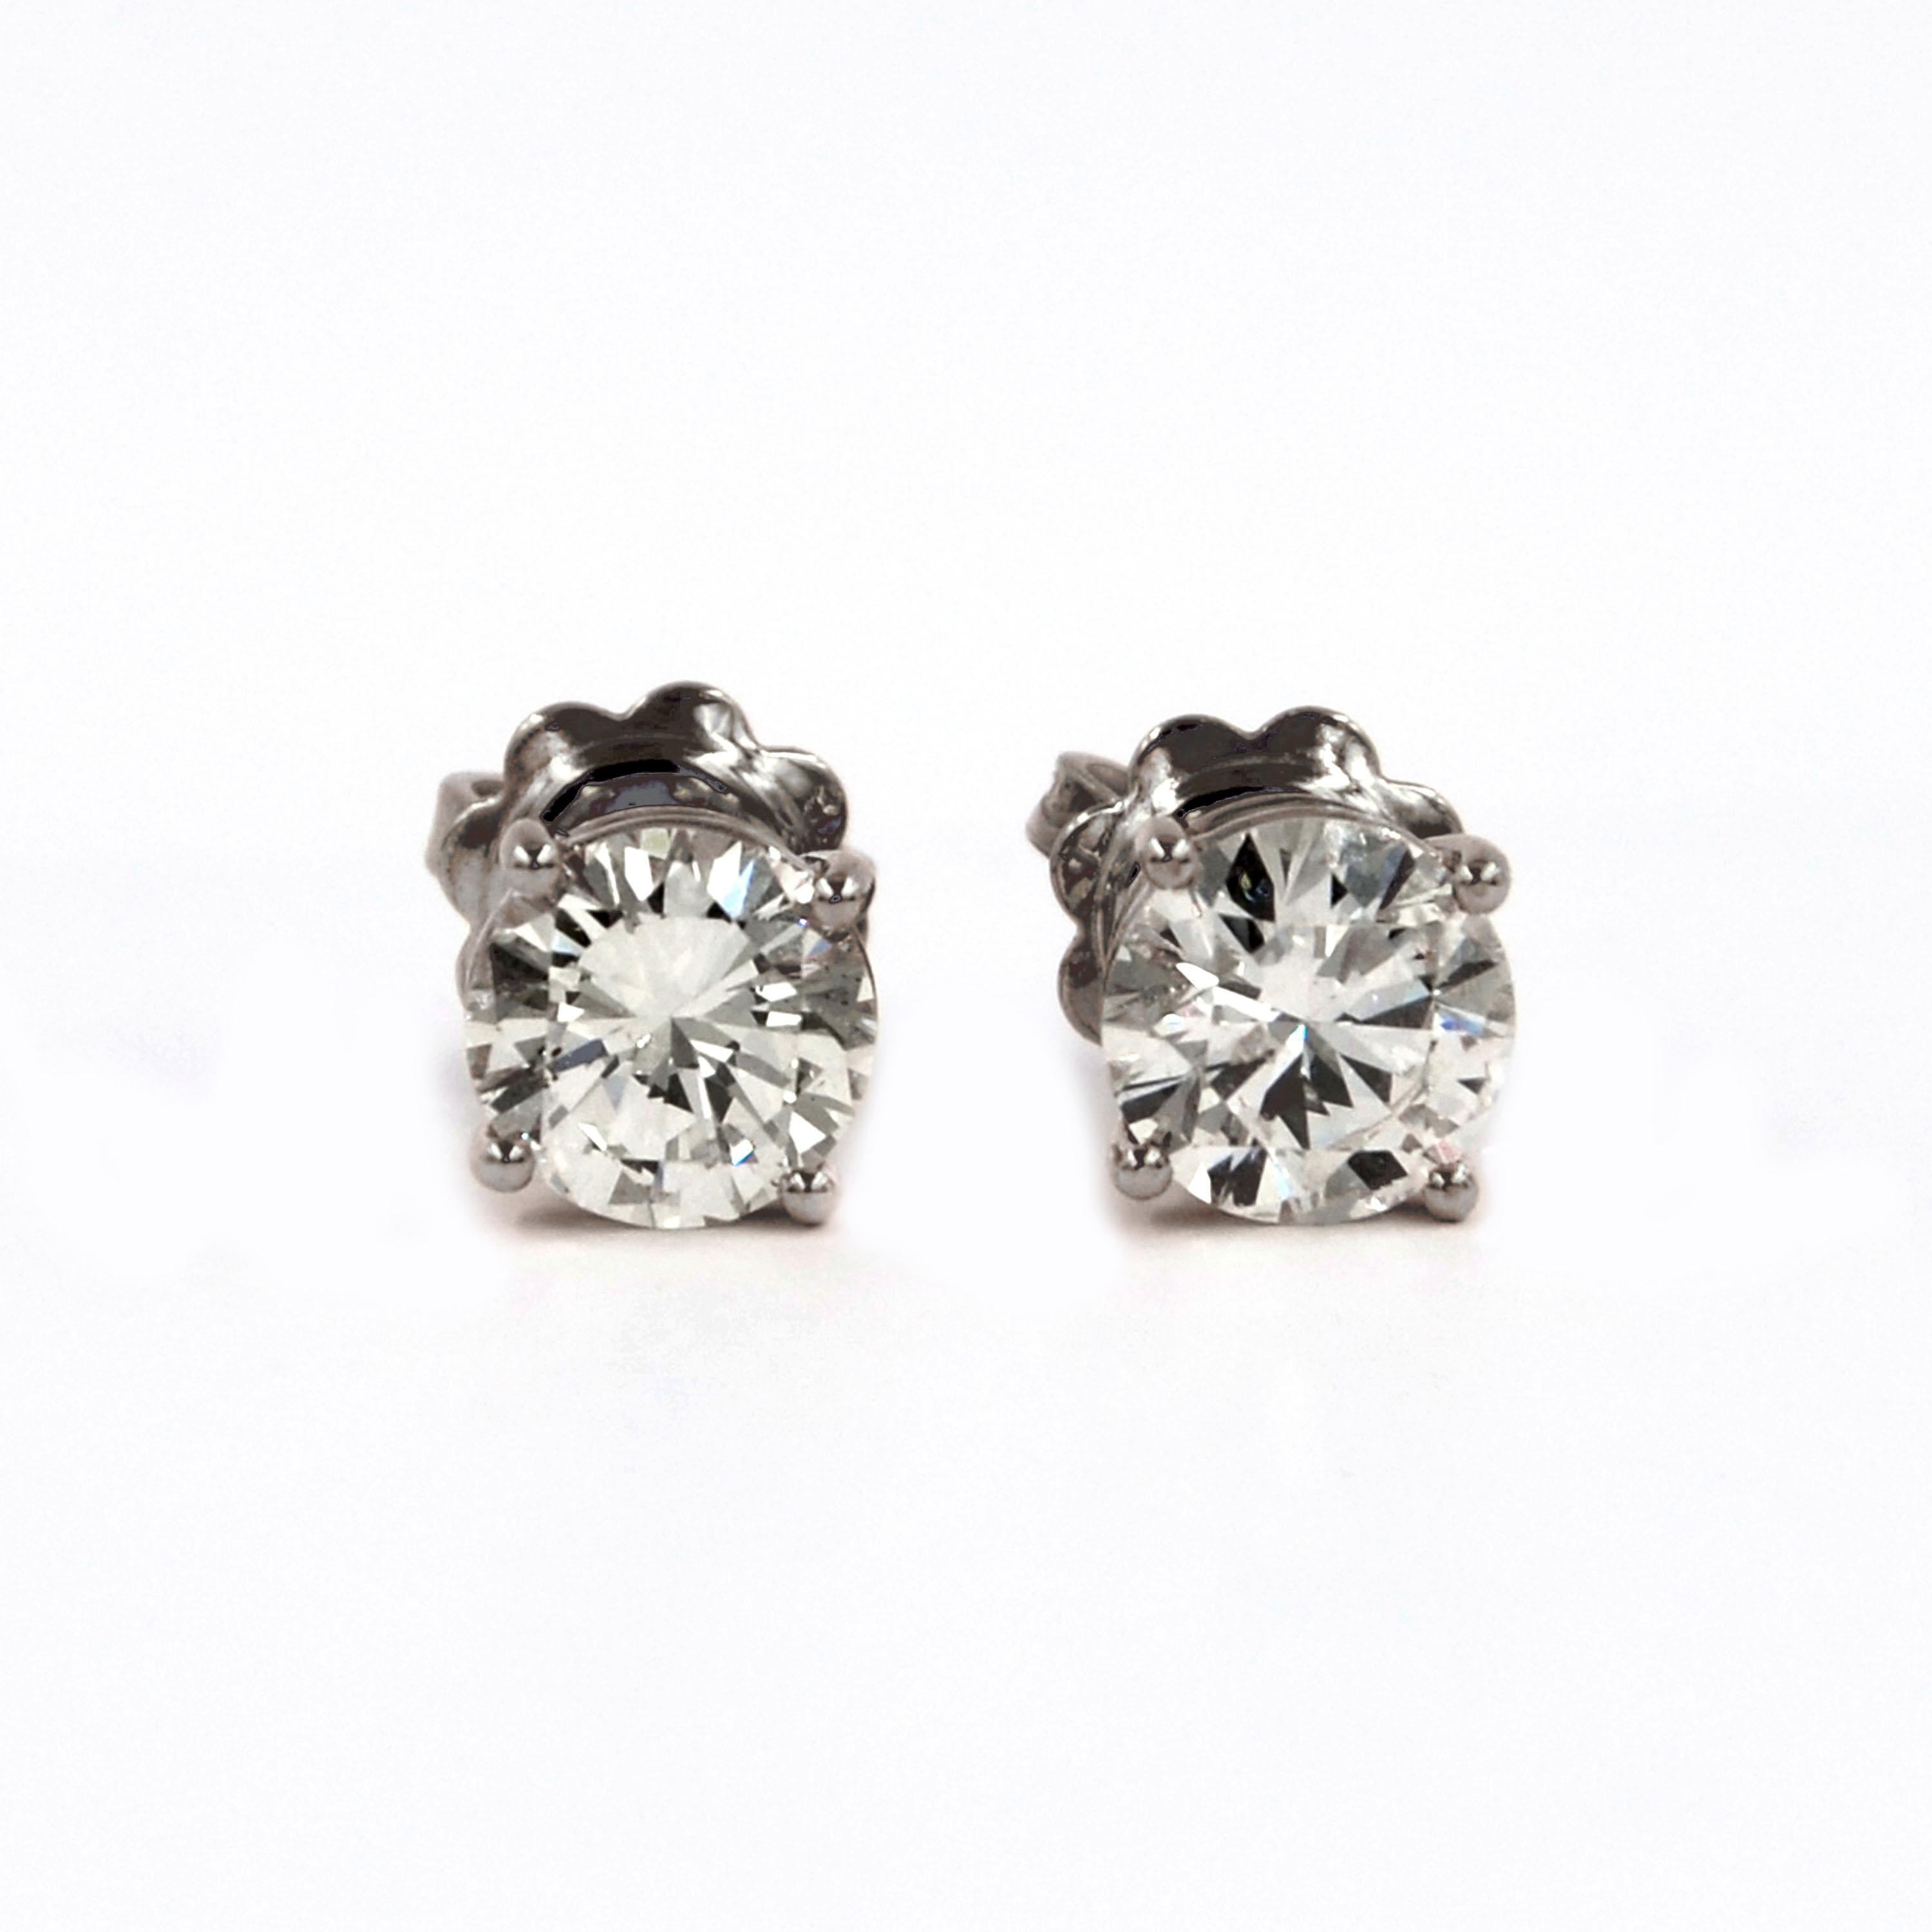 Garavelli 18 Karat White Gold Diamonds Stud Earrings In New Condition For Sale In Valenza, IT